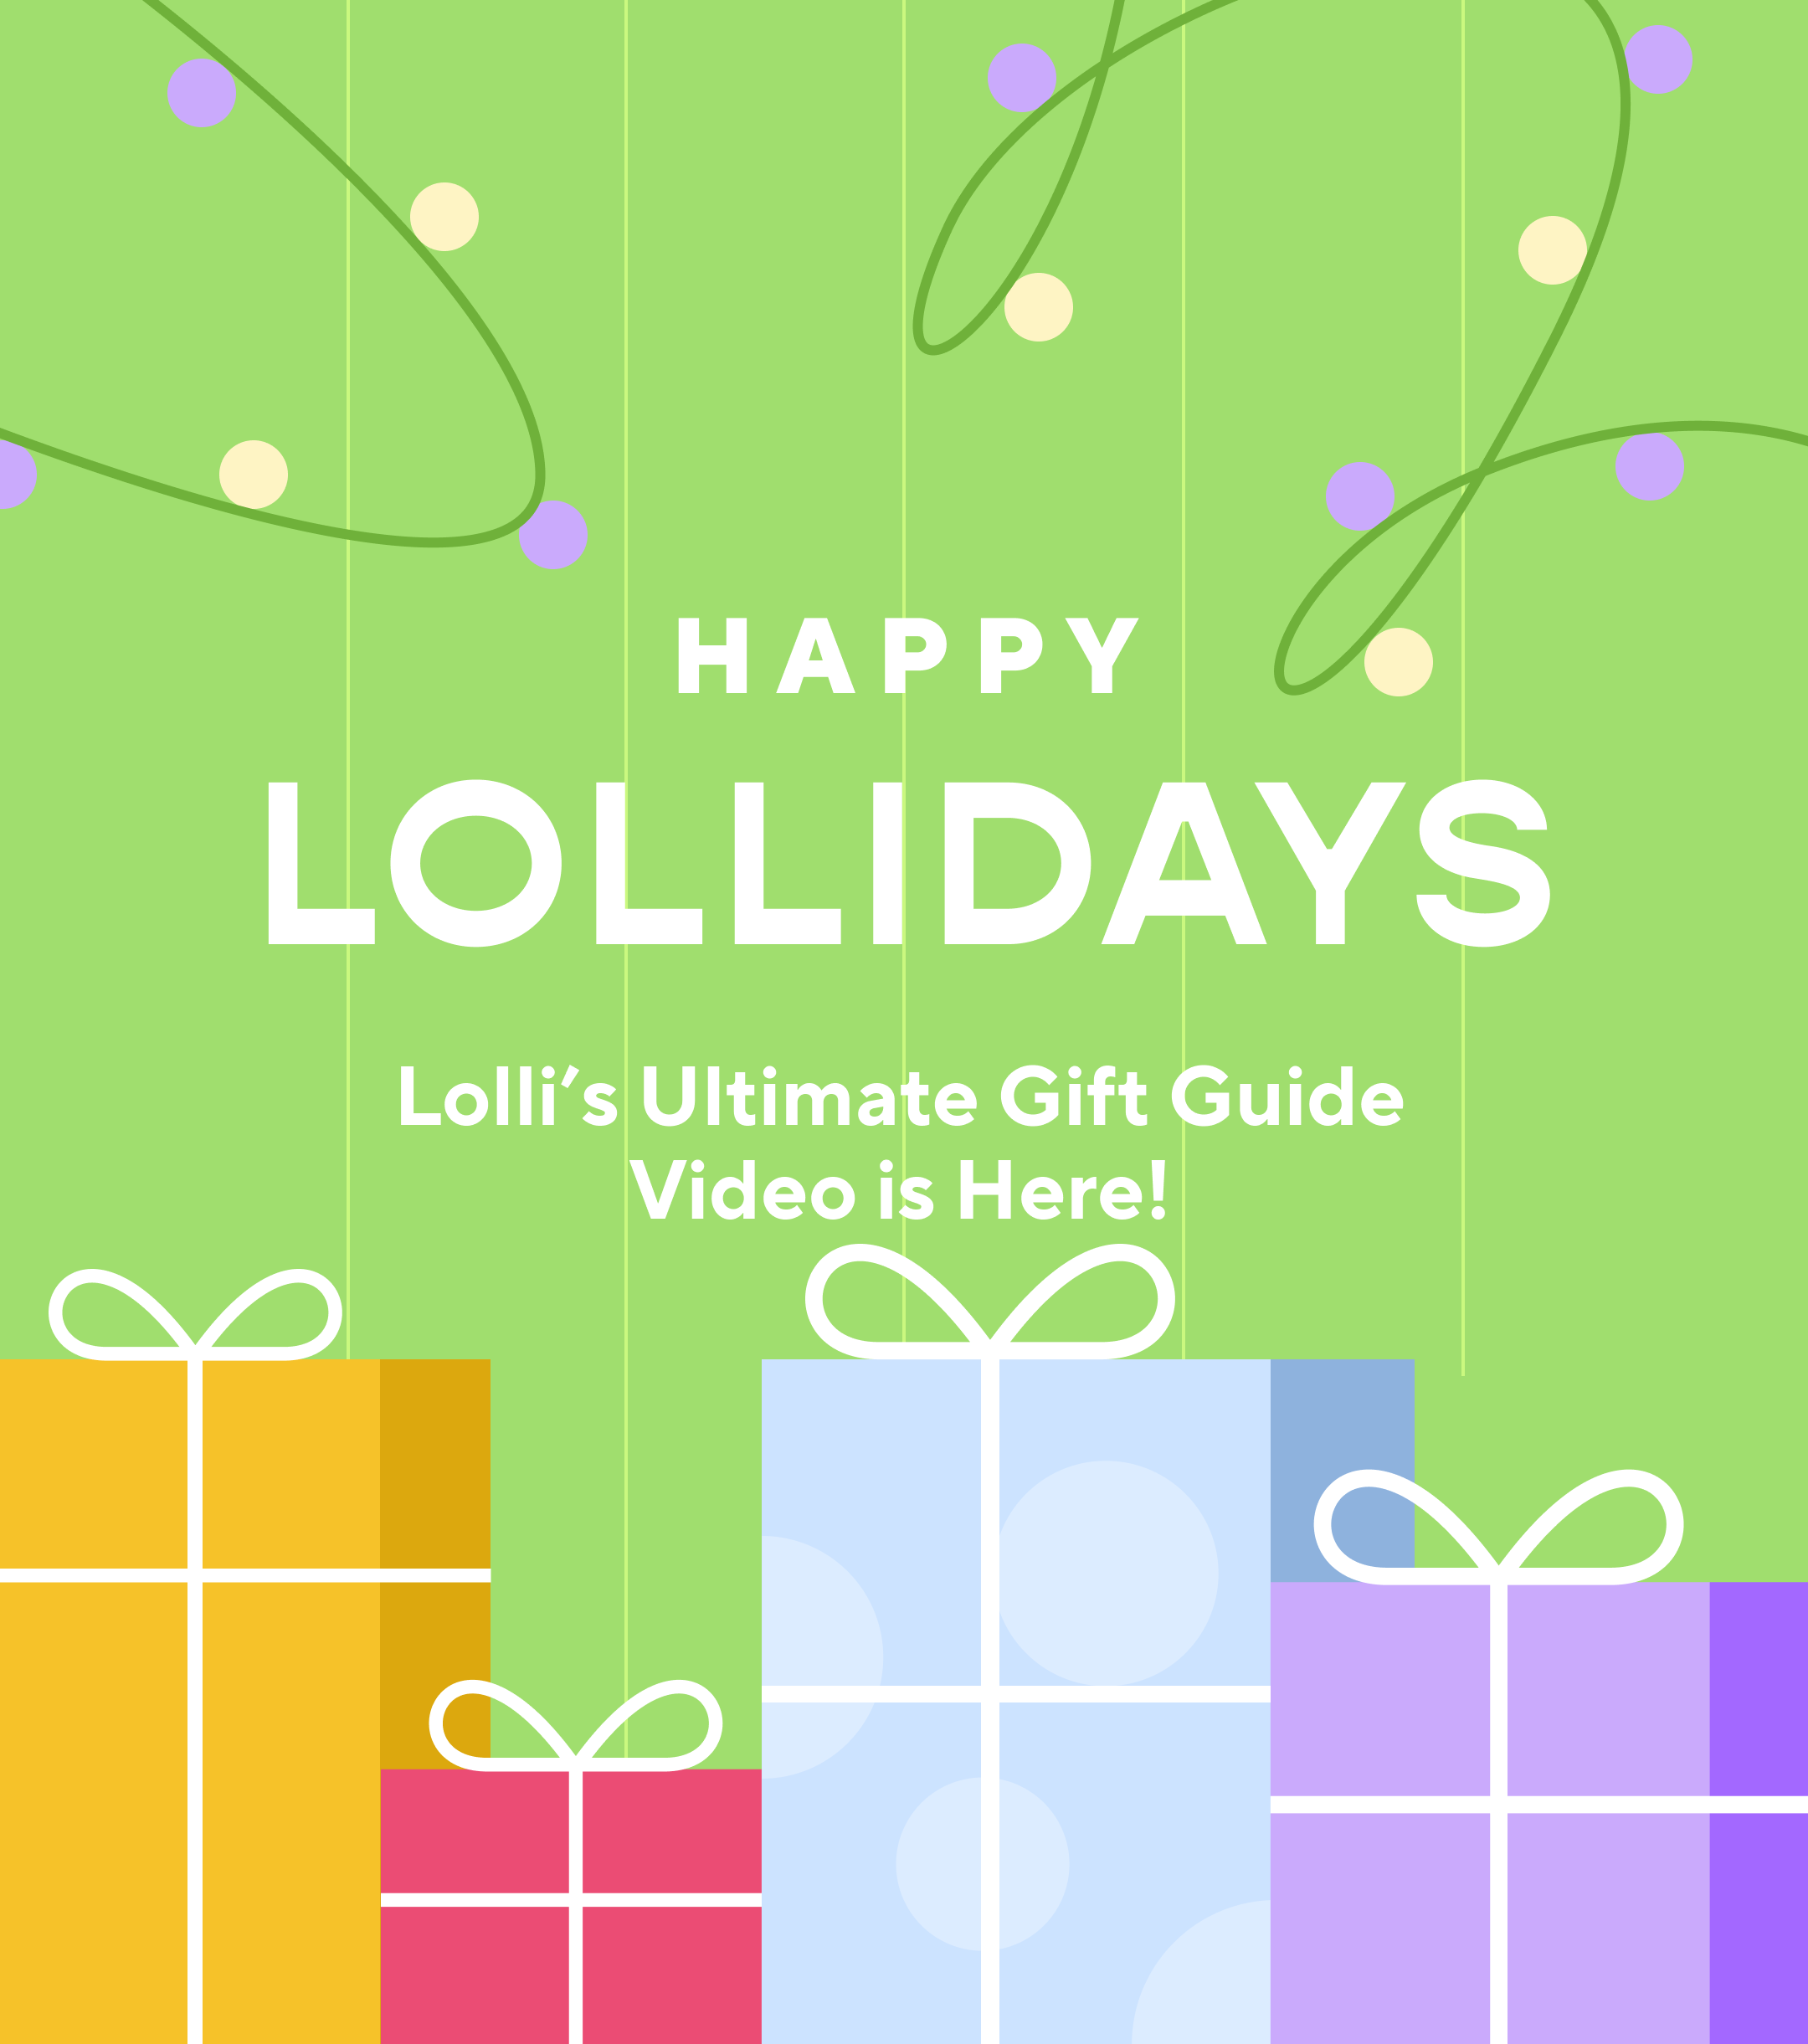 Lolli's Ultimate Gift Guide is Here!